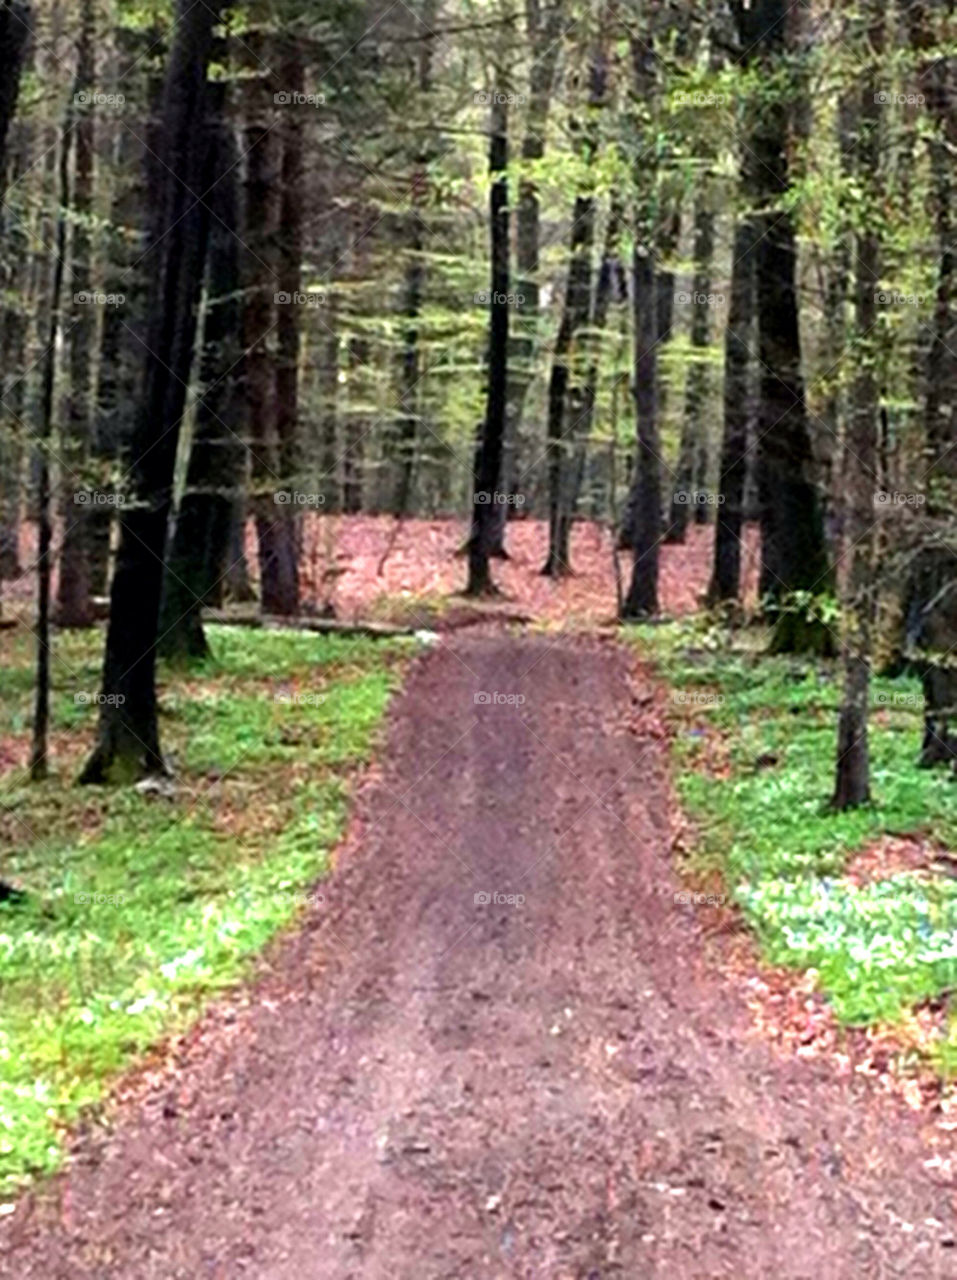 Gravel road in beech forest